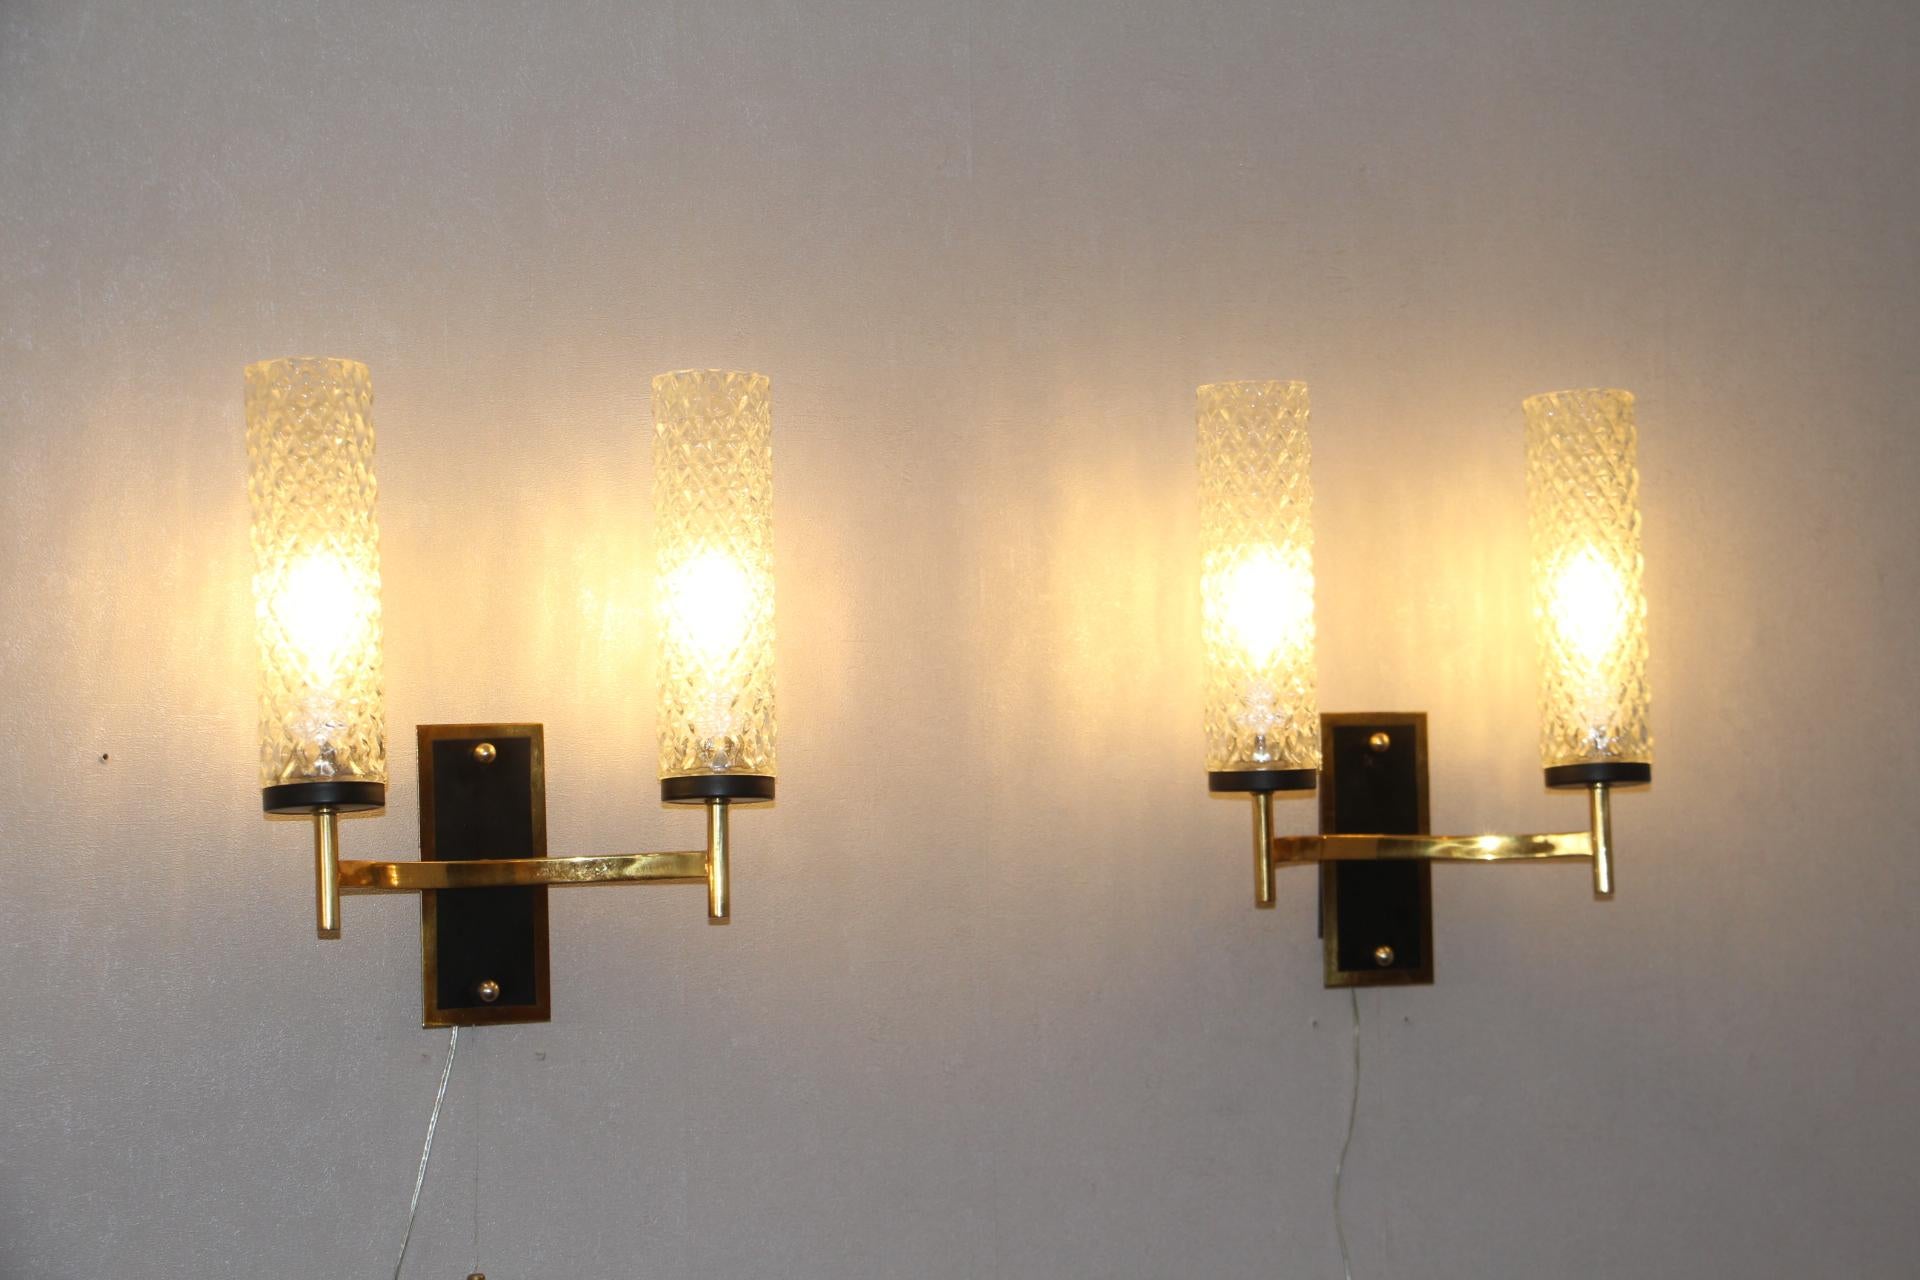 This beautiful pair of French midcentury sconces, in the style of Maison Arlus and Lunel, features textured glass tubes on a black lacquered steel back plate with brass details and switch. Perfect working order.
They are very elegant with a kind of